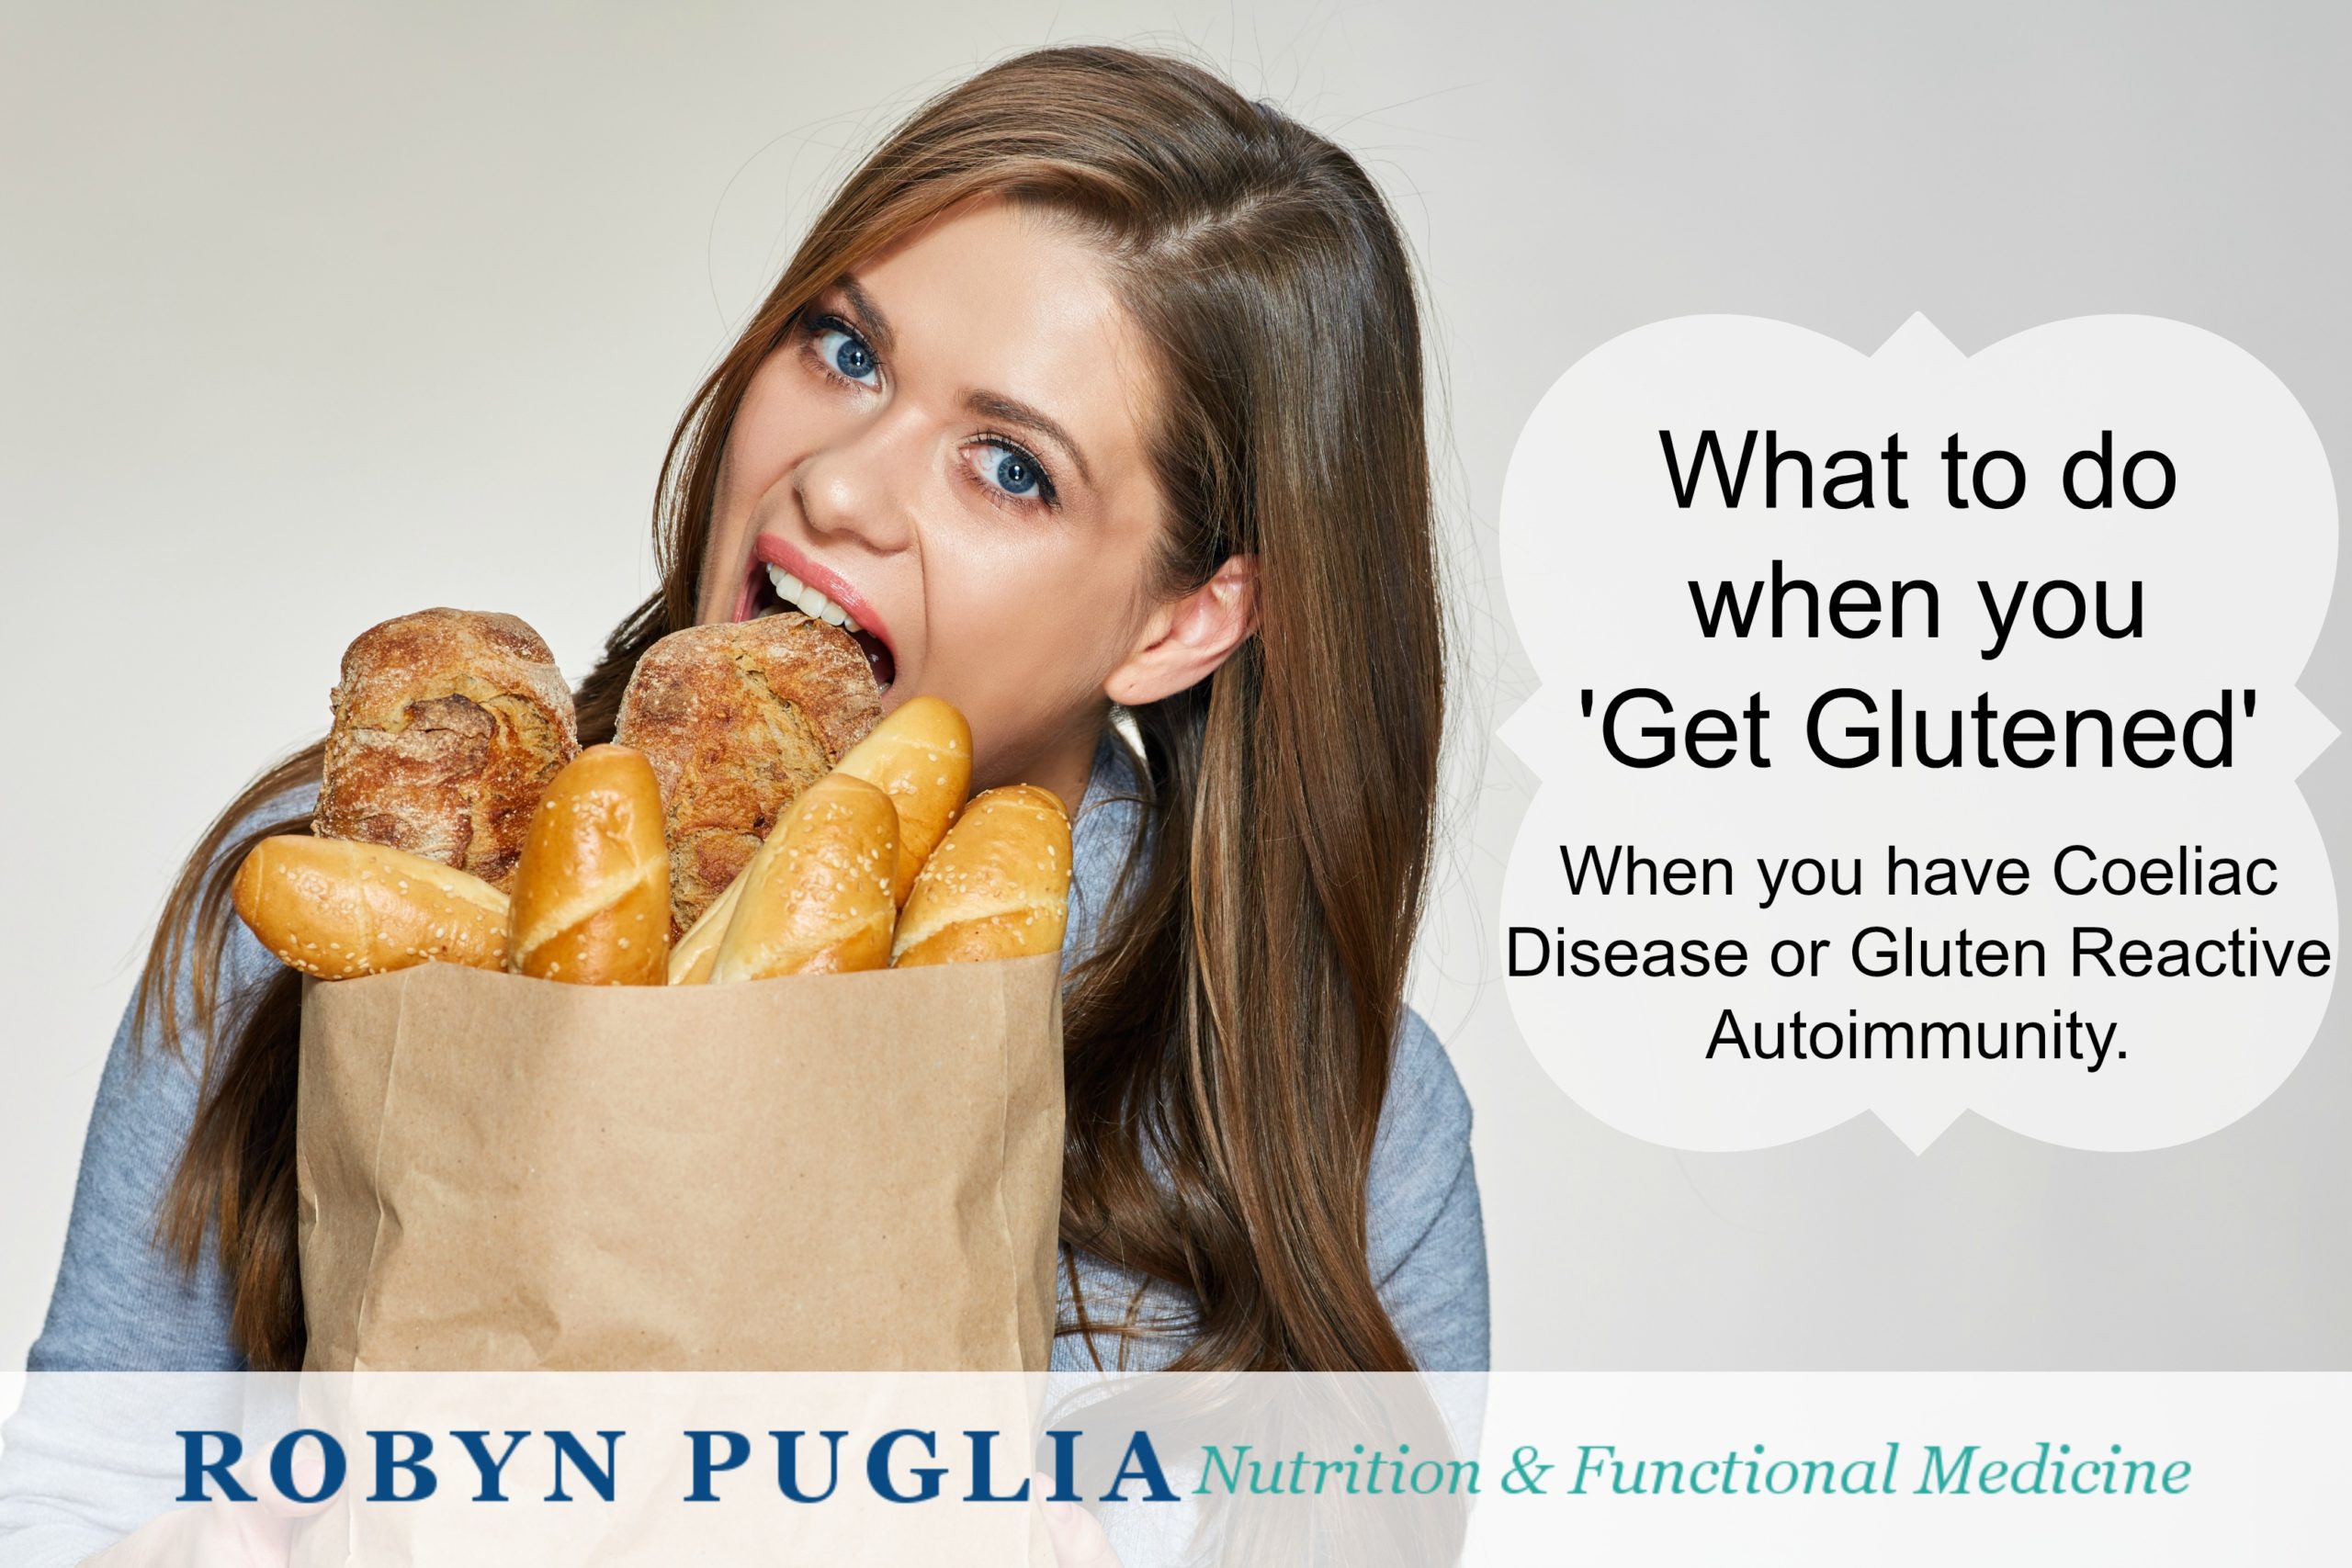 Coeliac Disease – what to do when you ‘get glutened’